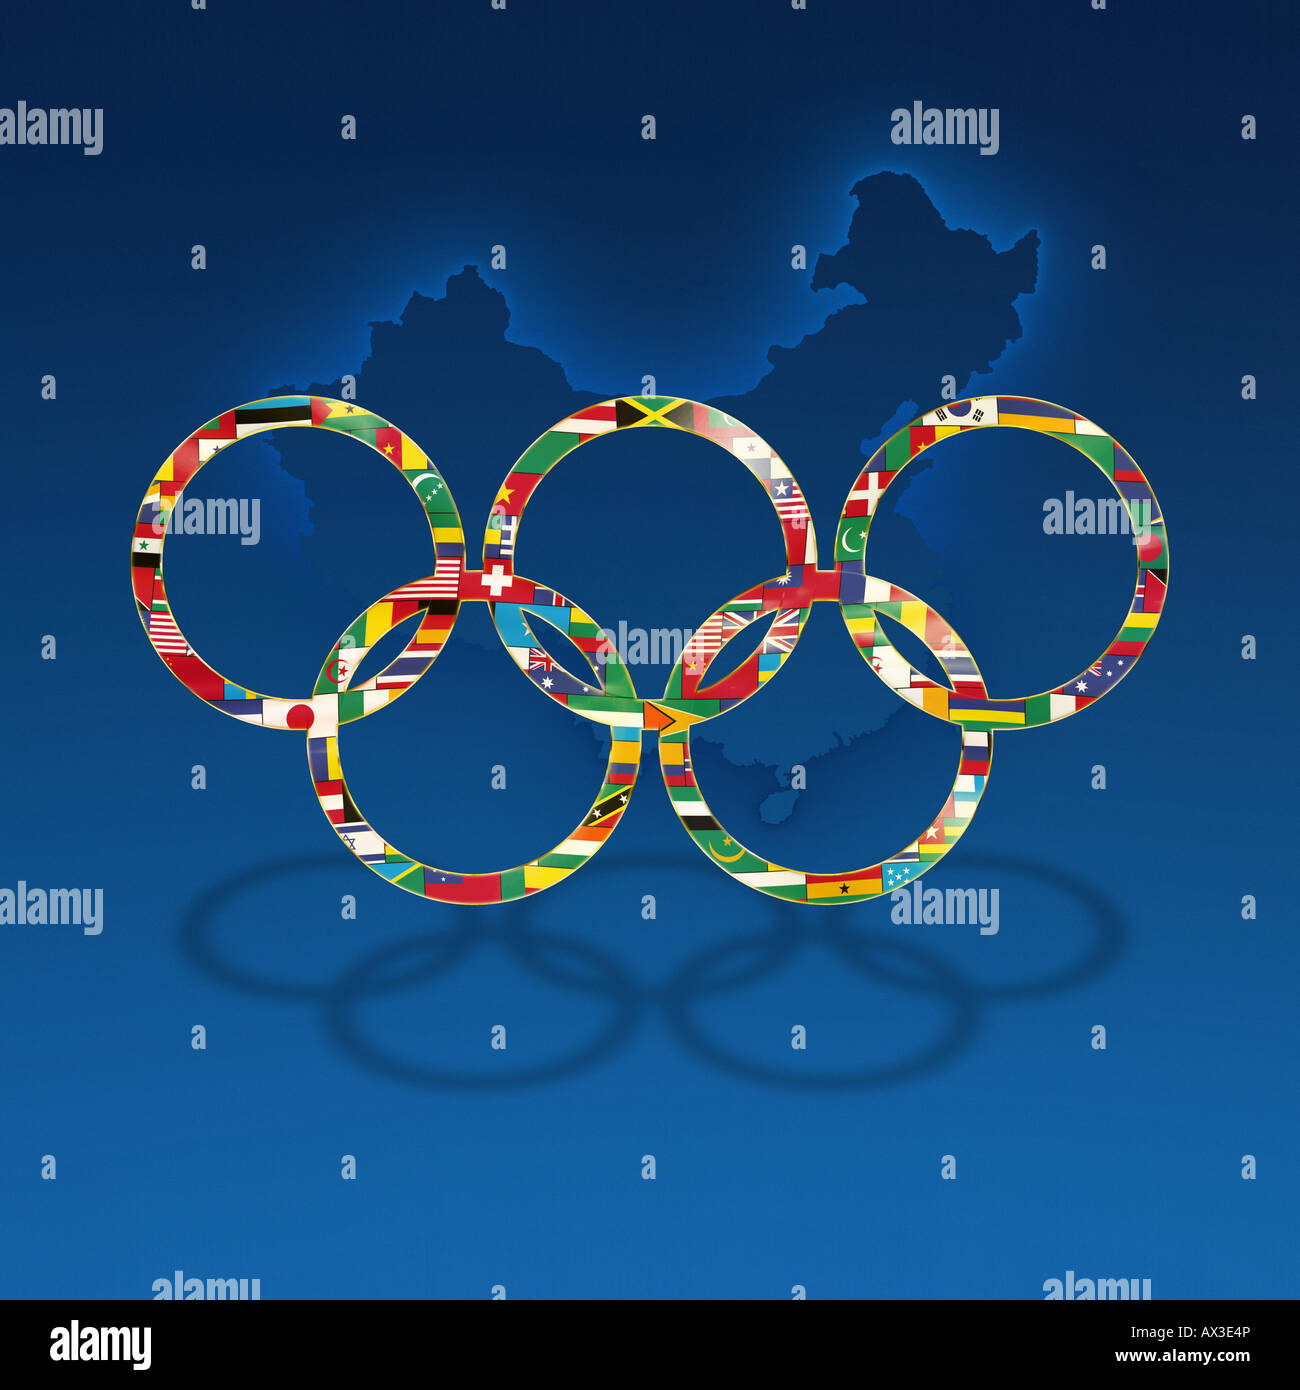 Flag pattern filled olympic rings against a nice blue gradated background including subtle outline of China Stock Photo